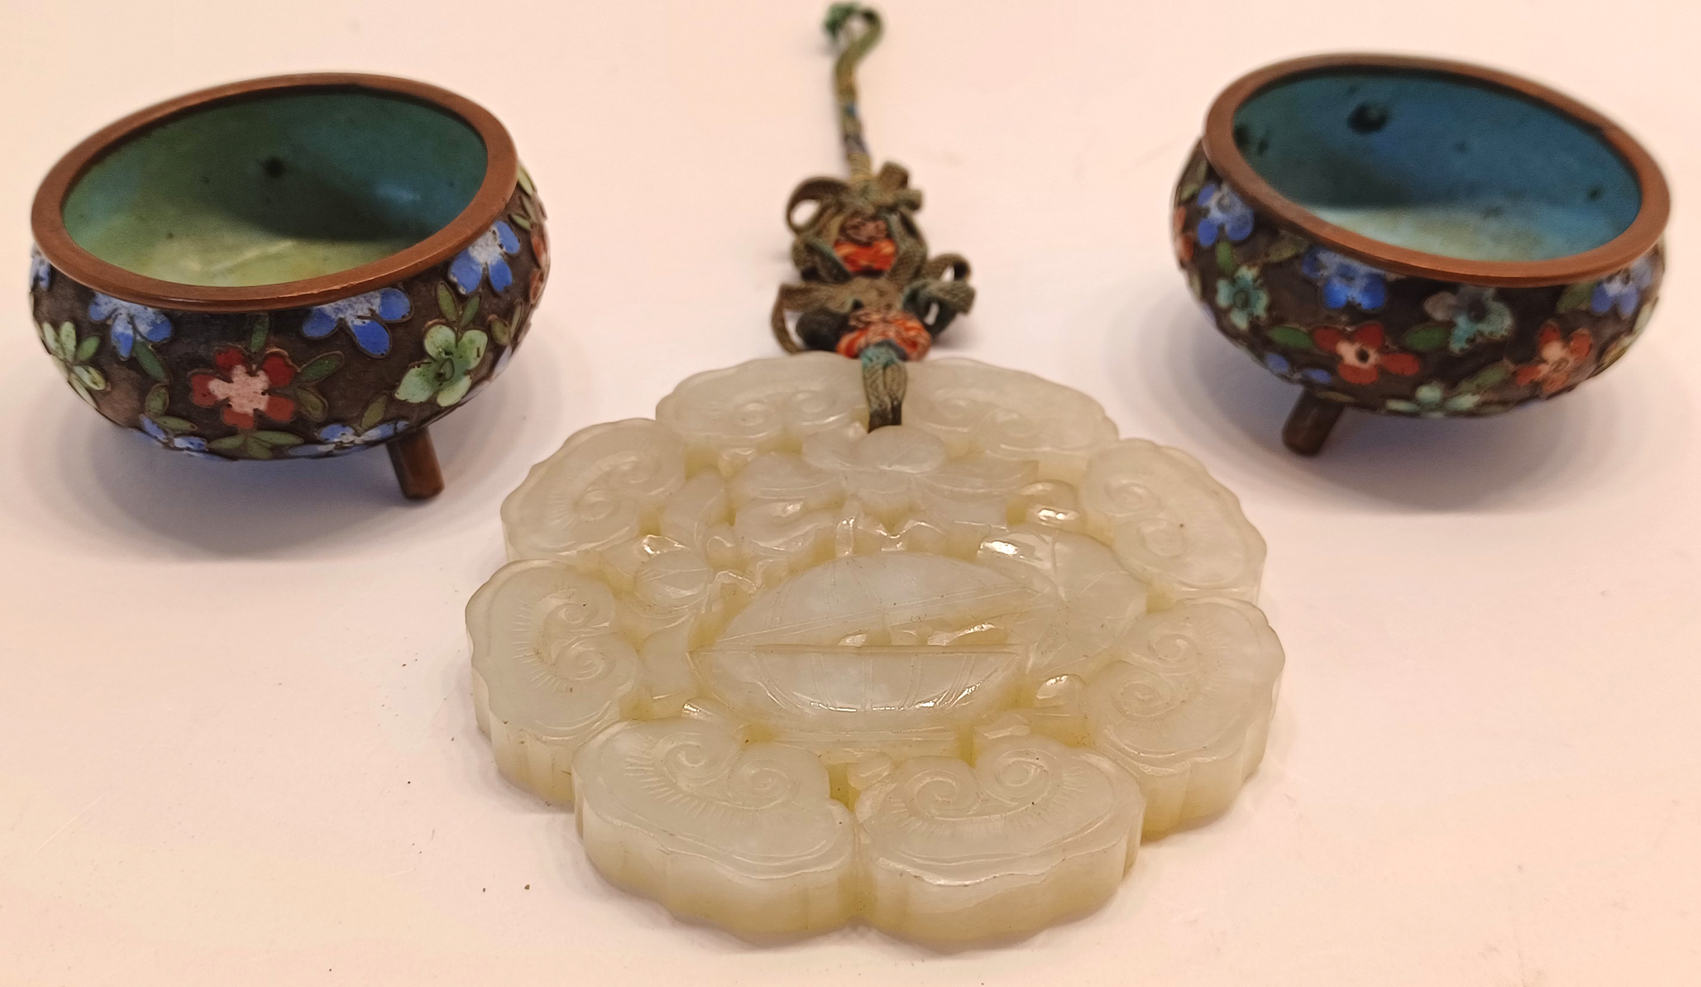 CHINESE CARVED LOTUS PENDANT PROBABLY JADE 72MM DIAMETER, AND 2 CHINESE CLOISONNE MINIATURE FLORAL